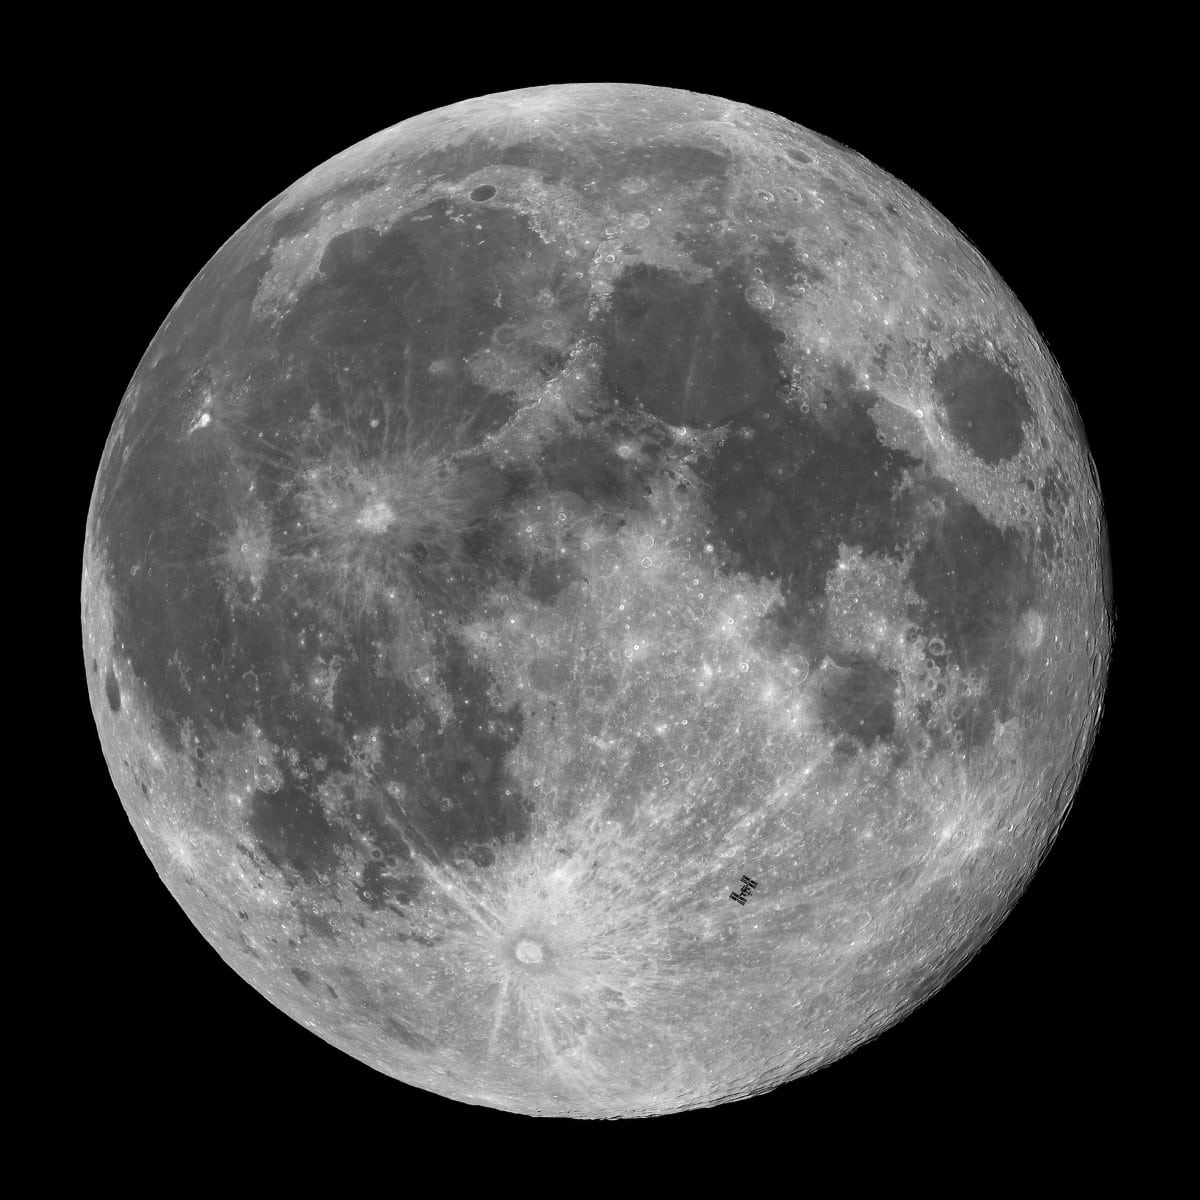 Image captures the International Space Station (ISS) in transit across October’s Full Moon